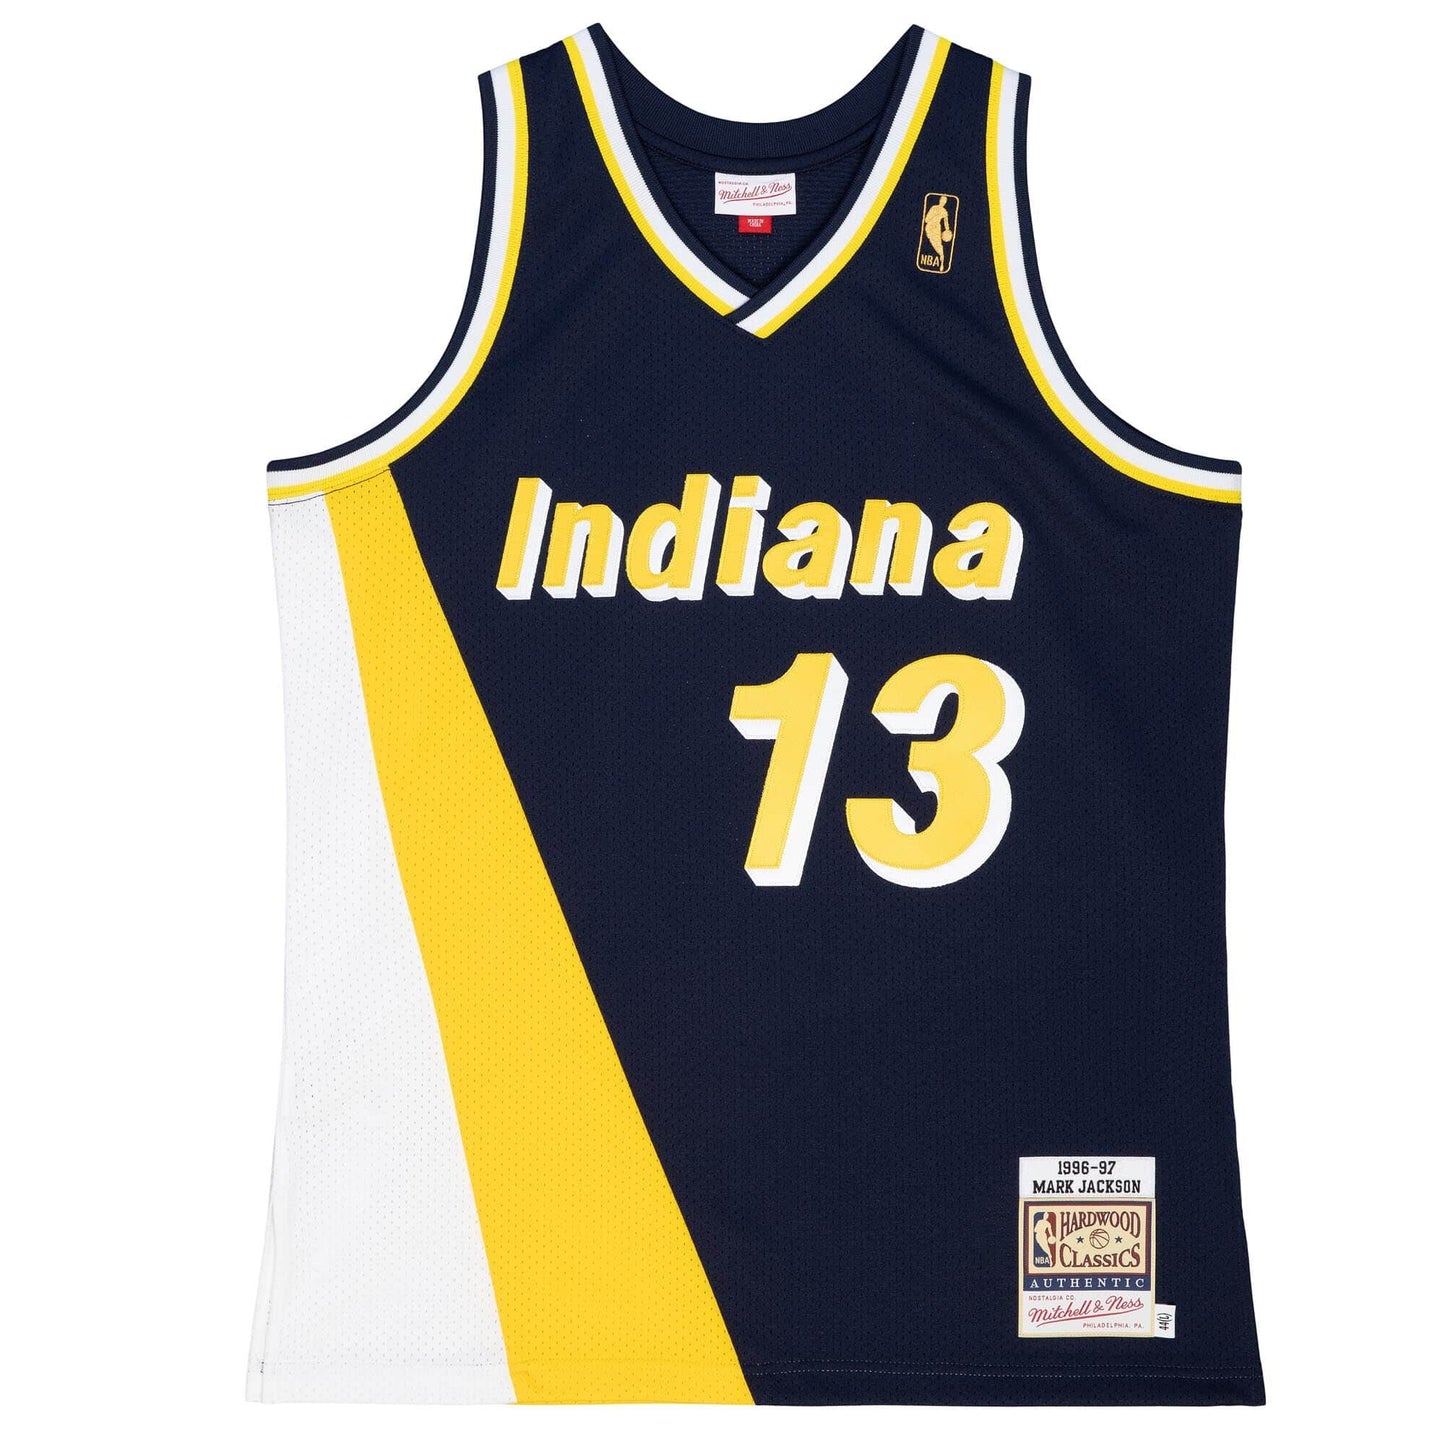 Authentic Mark Jackson Indiana Pacers 1996-97 Jersey